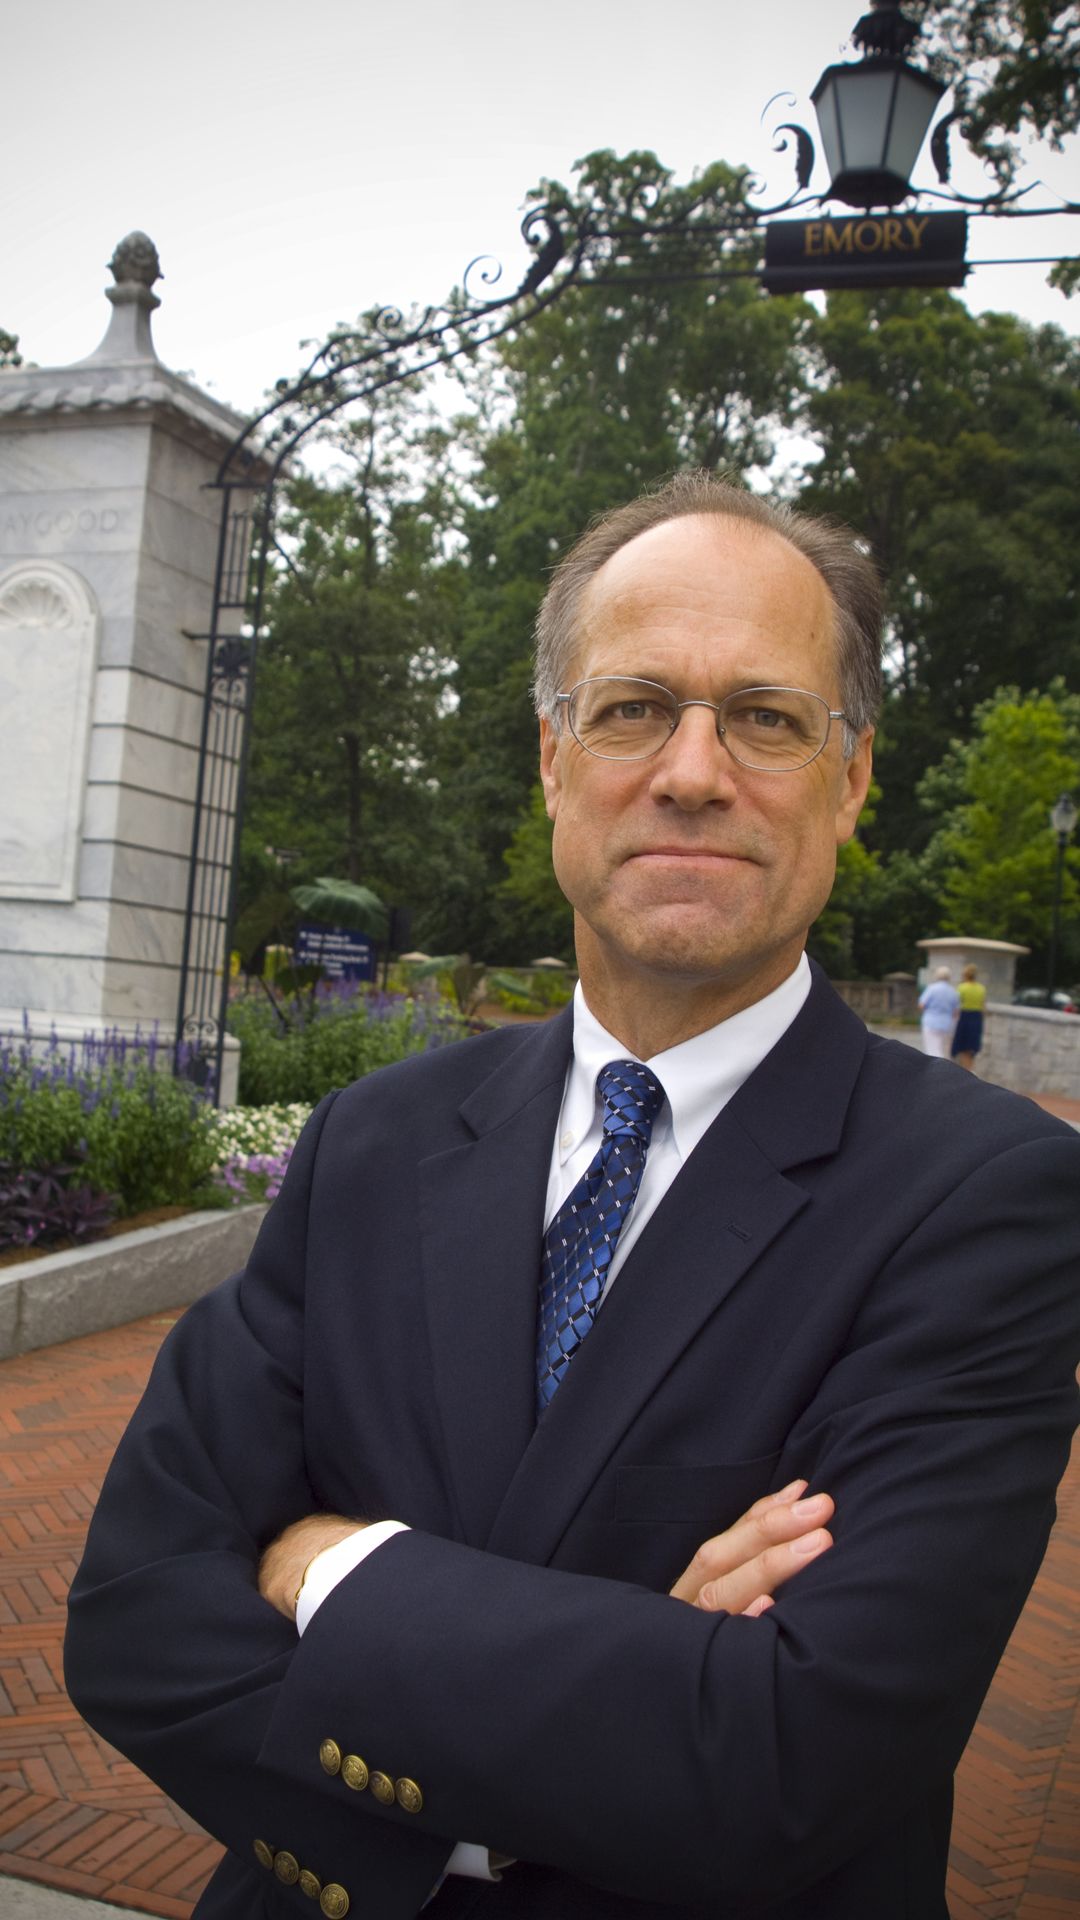 Gary Hauk in front of Emory's front gate